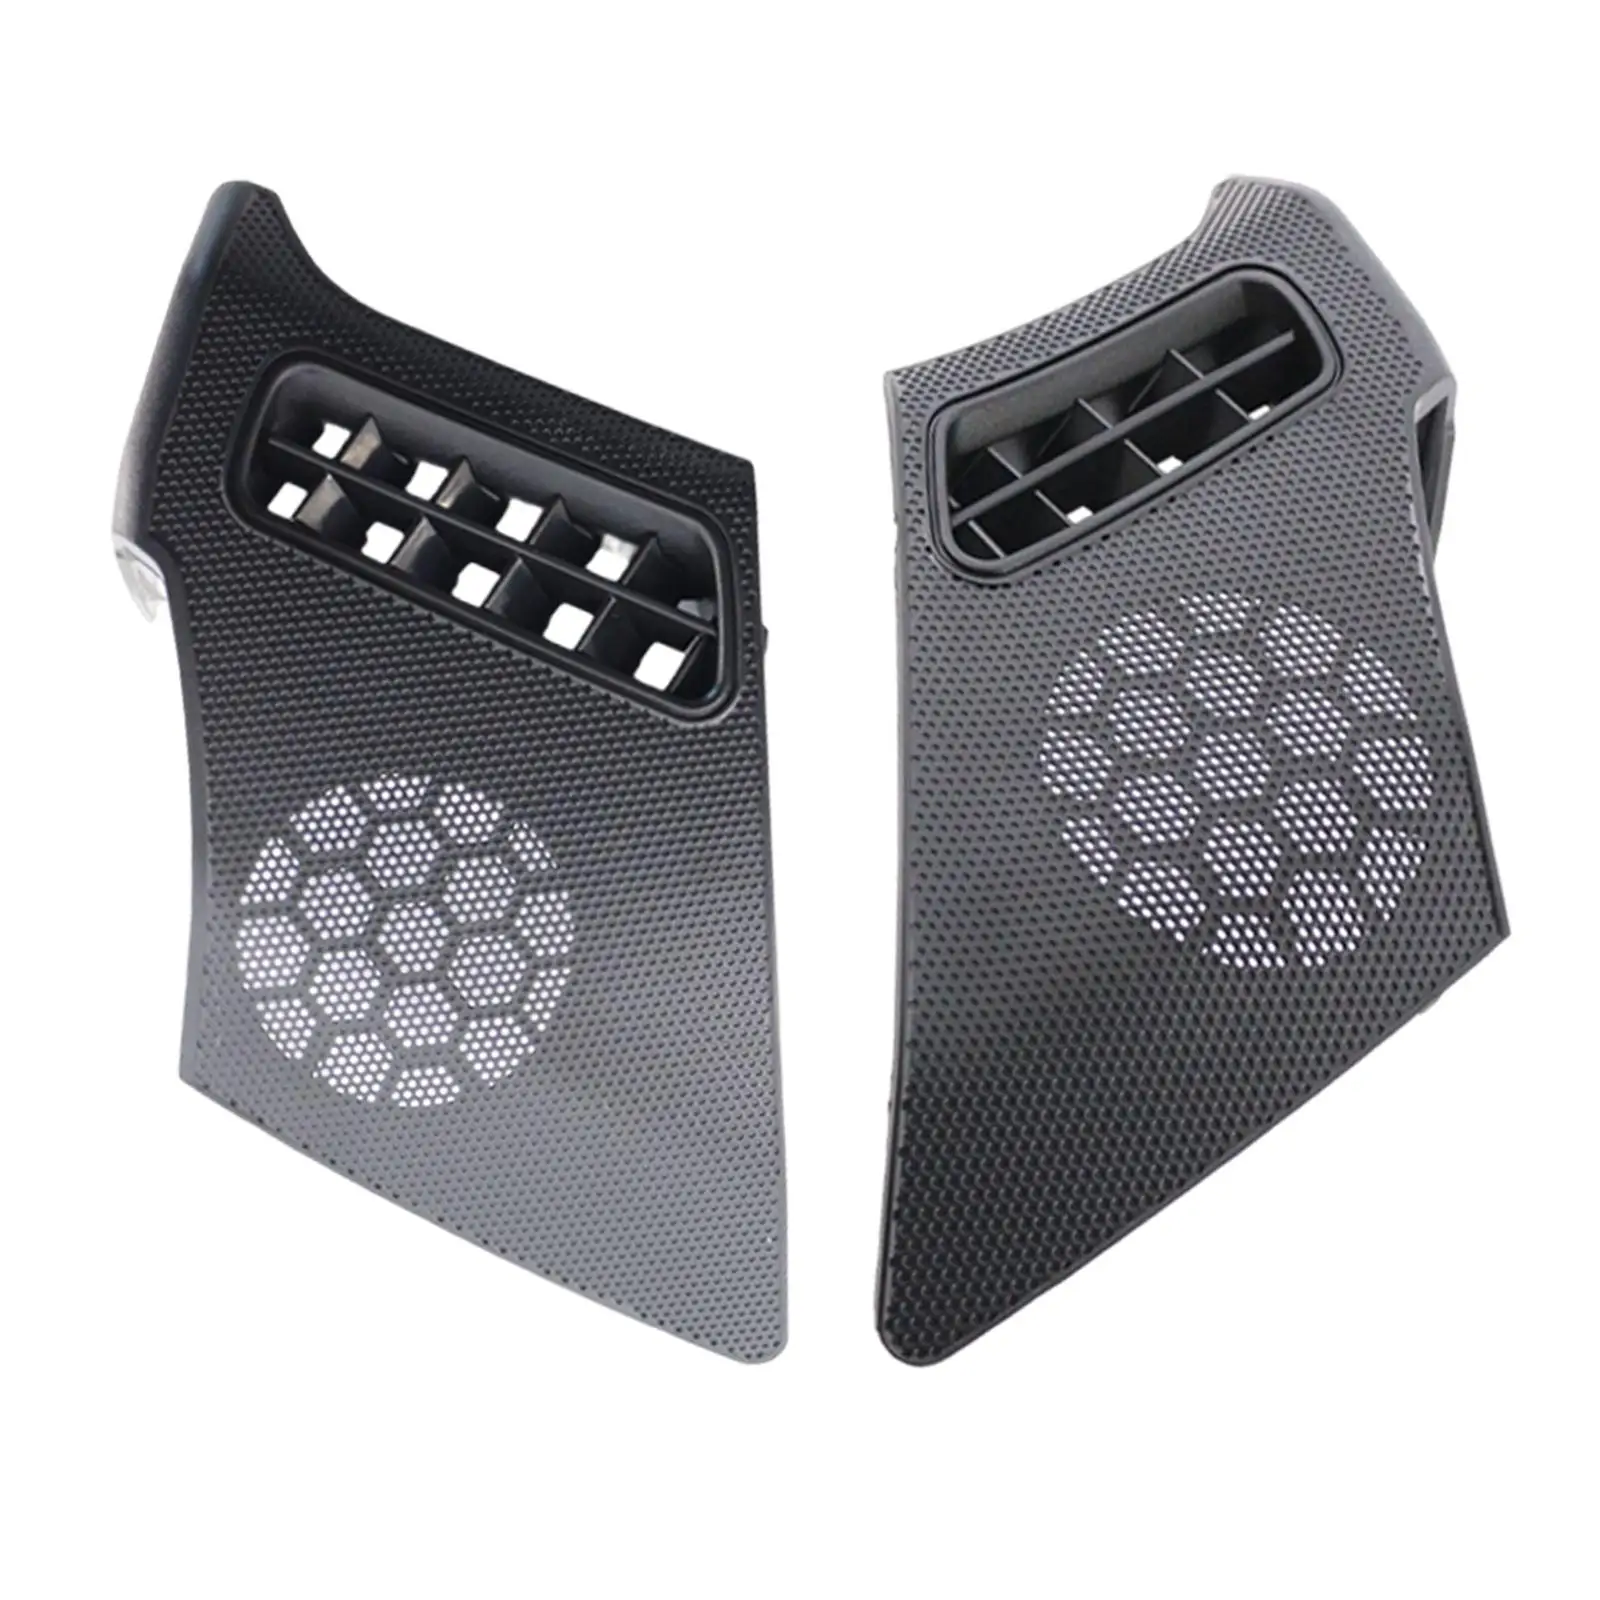  Board Air Vent Speaker Grill Covers Decorative Protective Durable